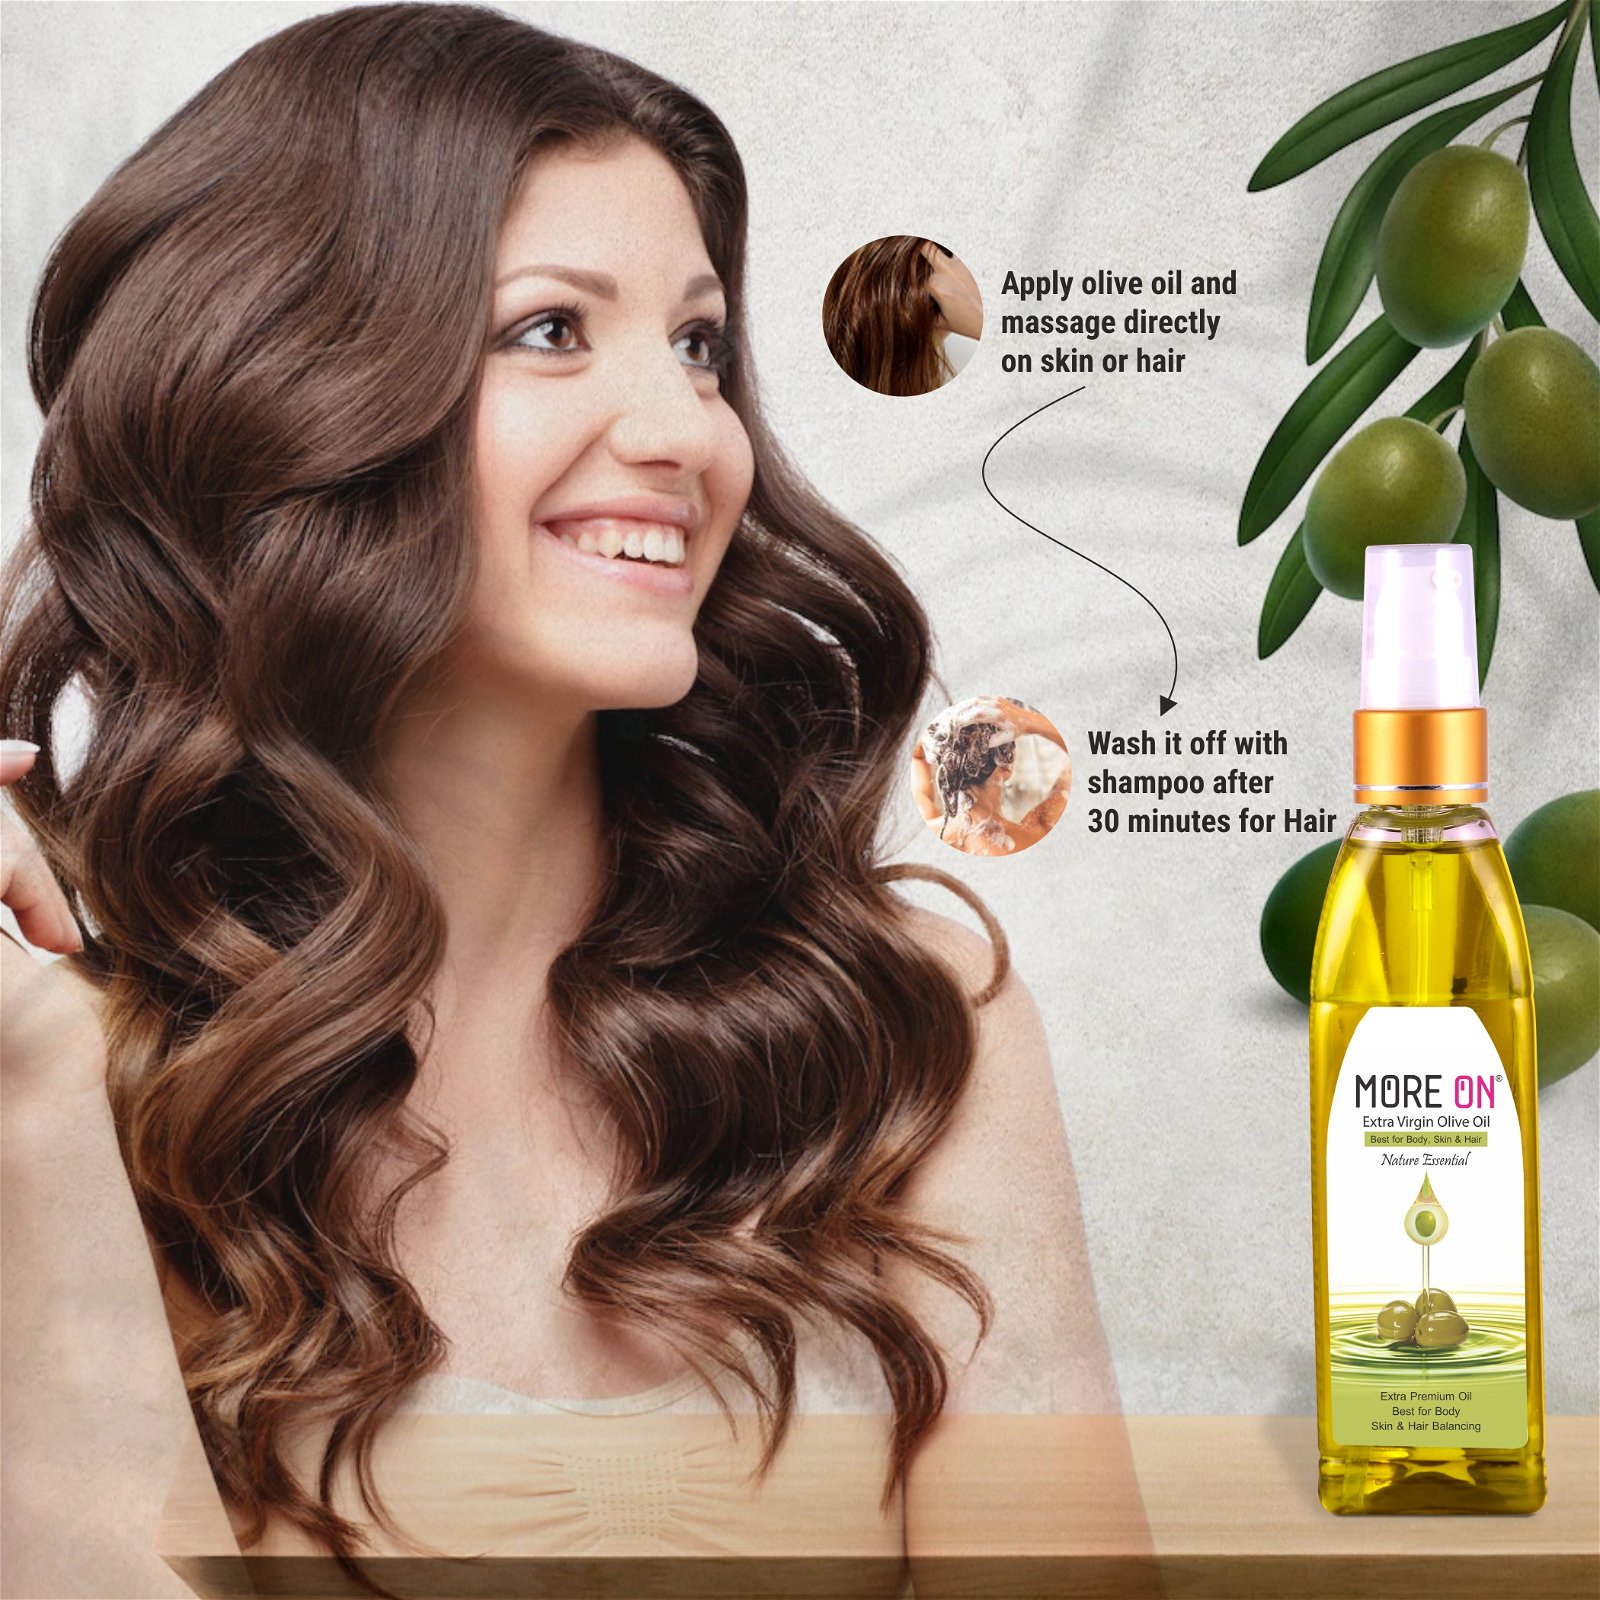 28 Day Study Of Olive Oil For Hair Growth  An Indepth Review